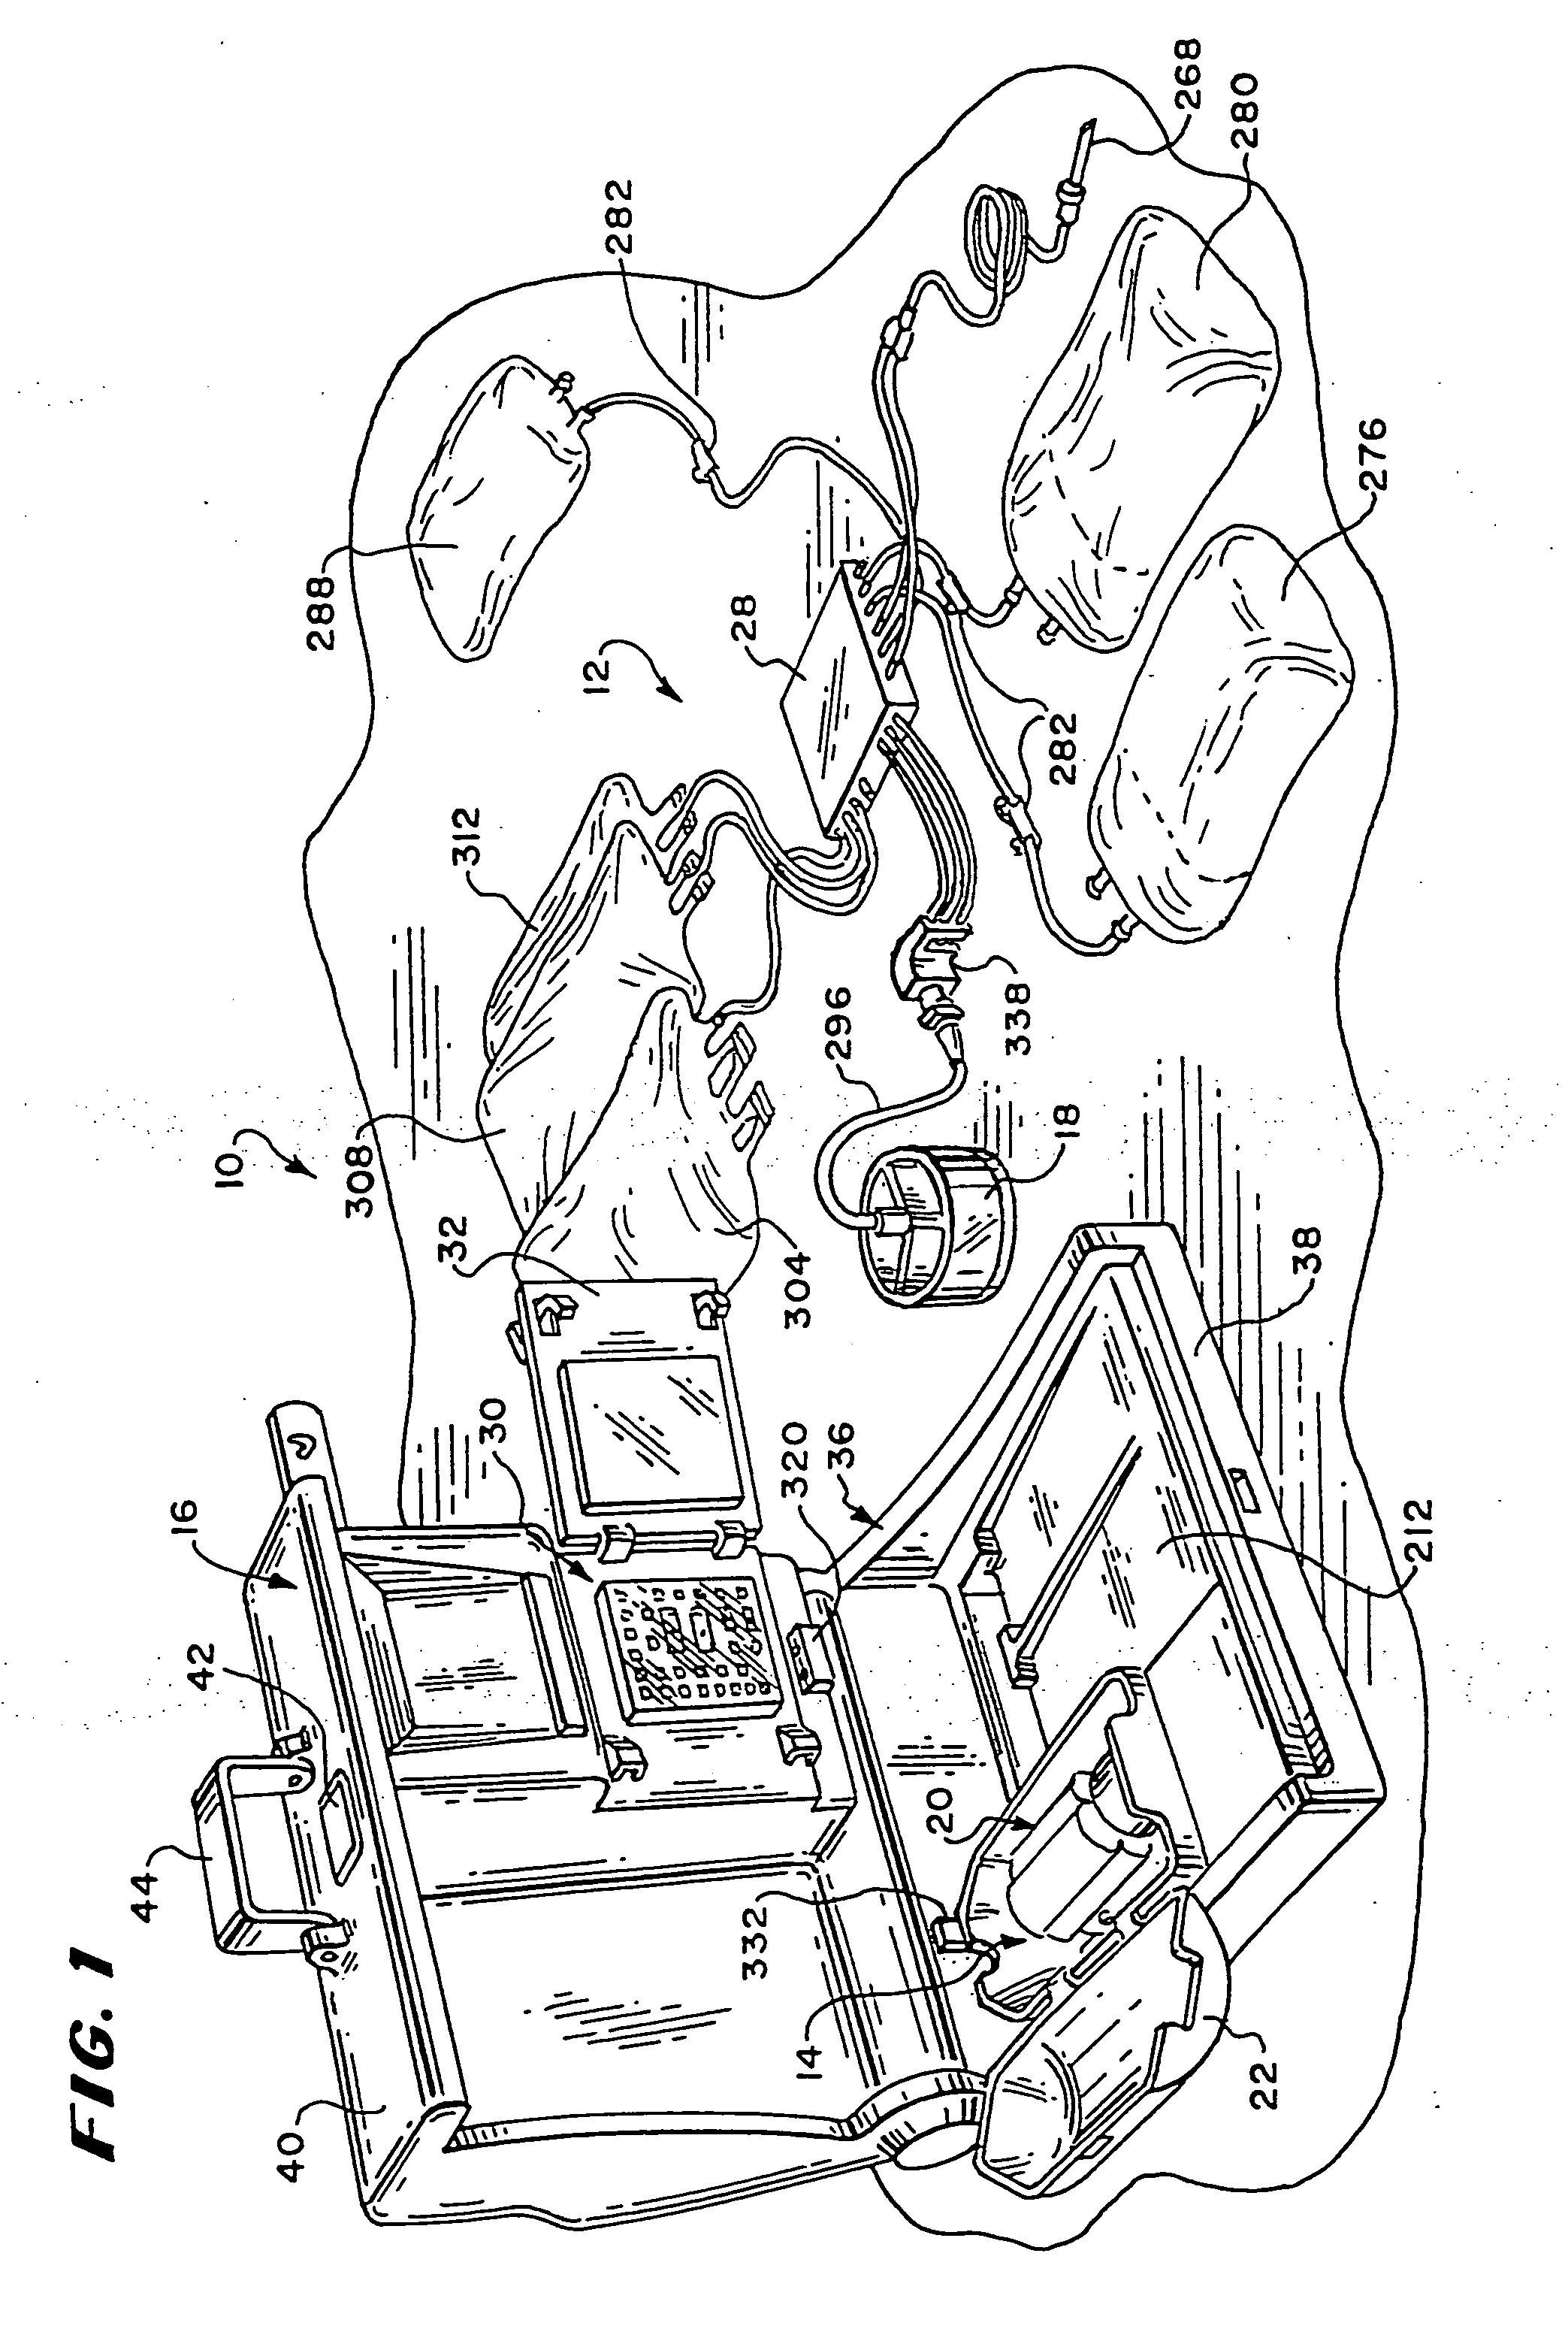 Blood processing systems with fluid flow cassette with a pressure actuated pump chamber and in-line air trap